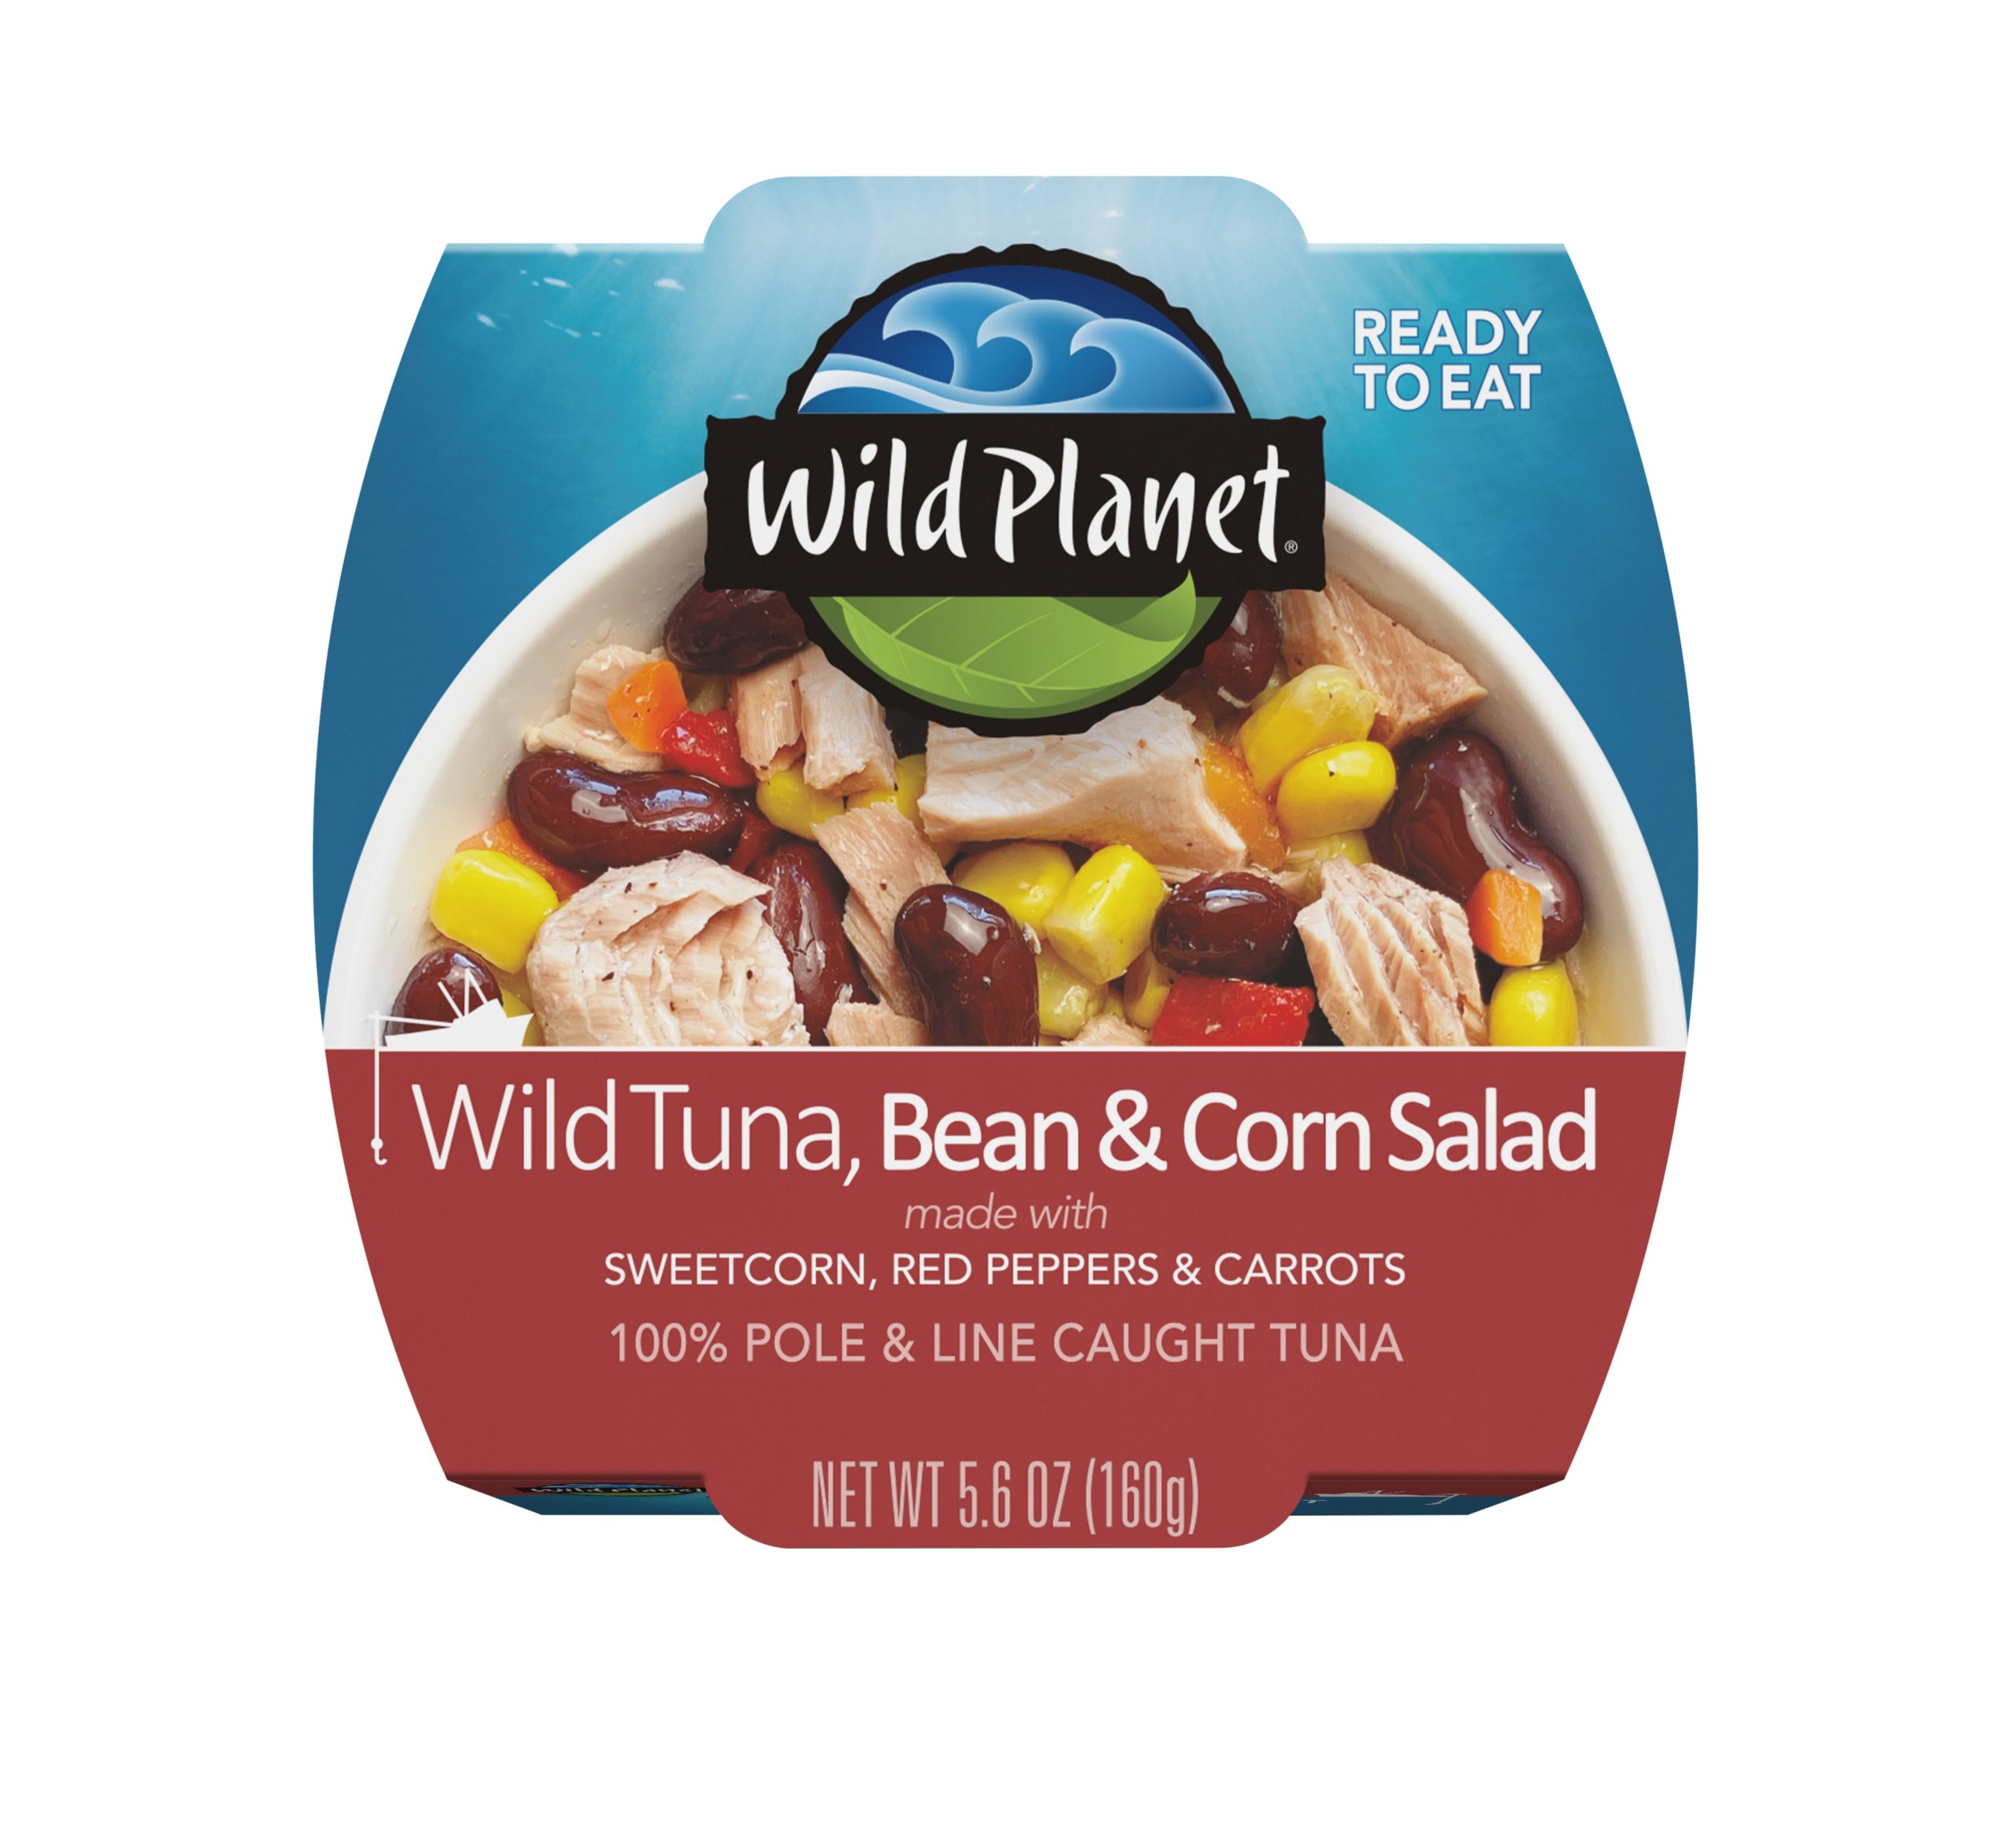 Wild Planet Foods Takes Home Good Housekeeping Sustainable Innovation Award